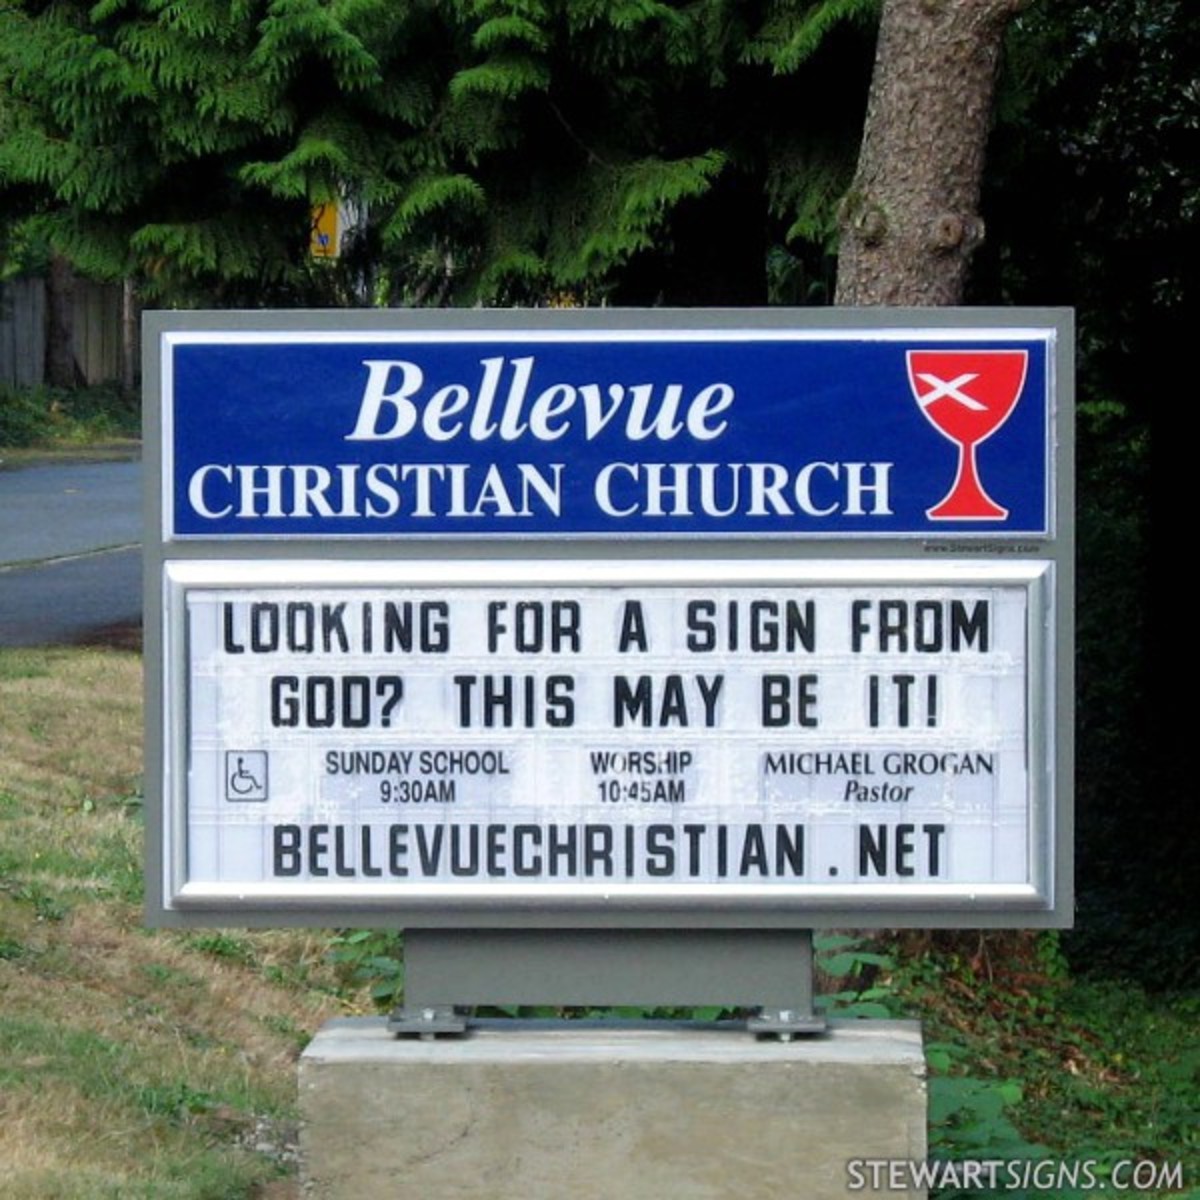 Church sign - looking for a sign from God - this may be it!